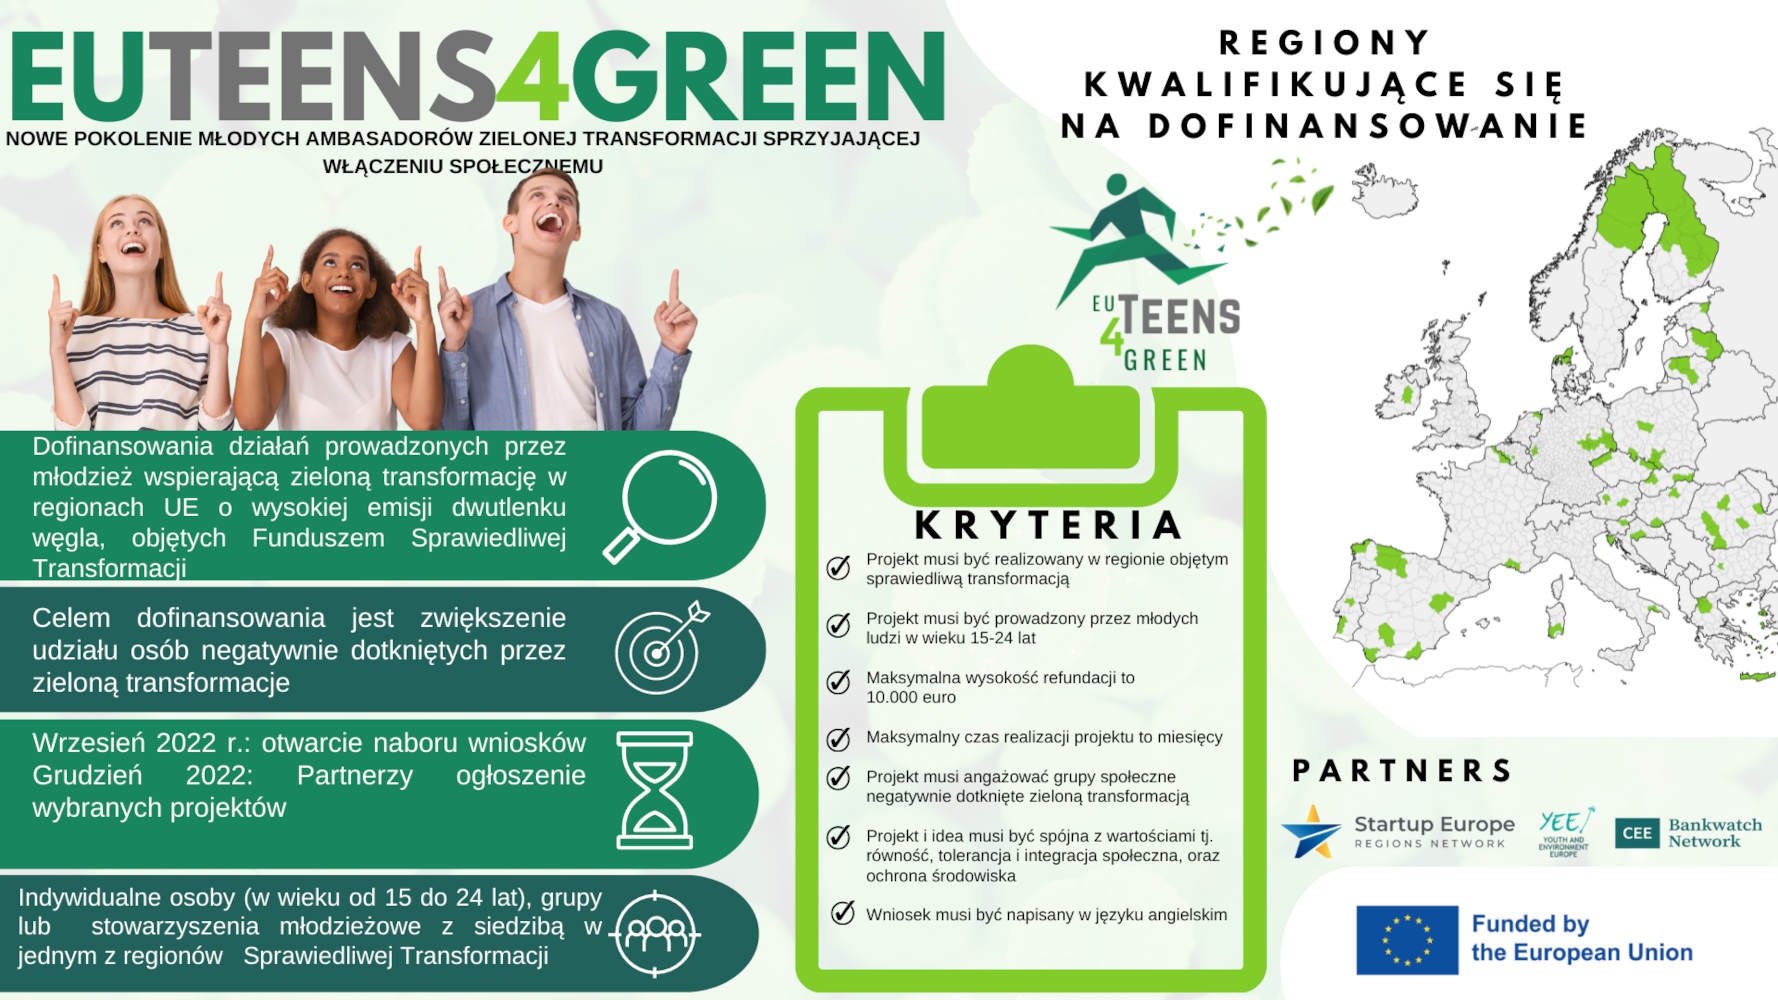 EUTeens4Green- A new Generation of Young Ambassadors for a just inclusive Transition